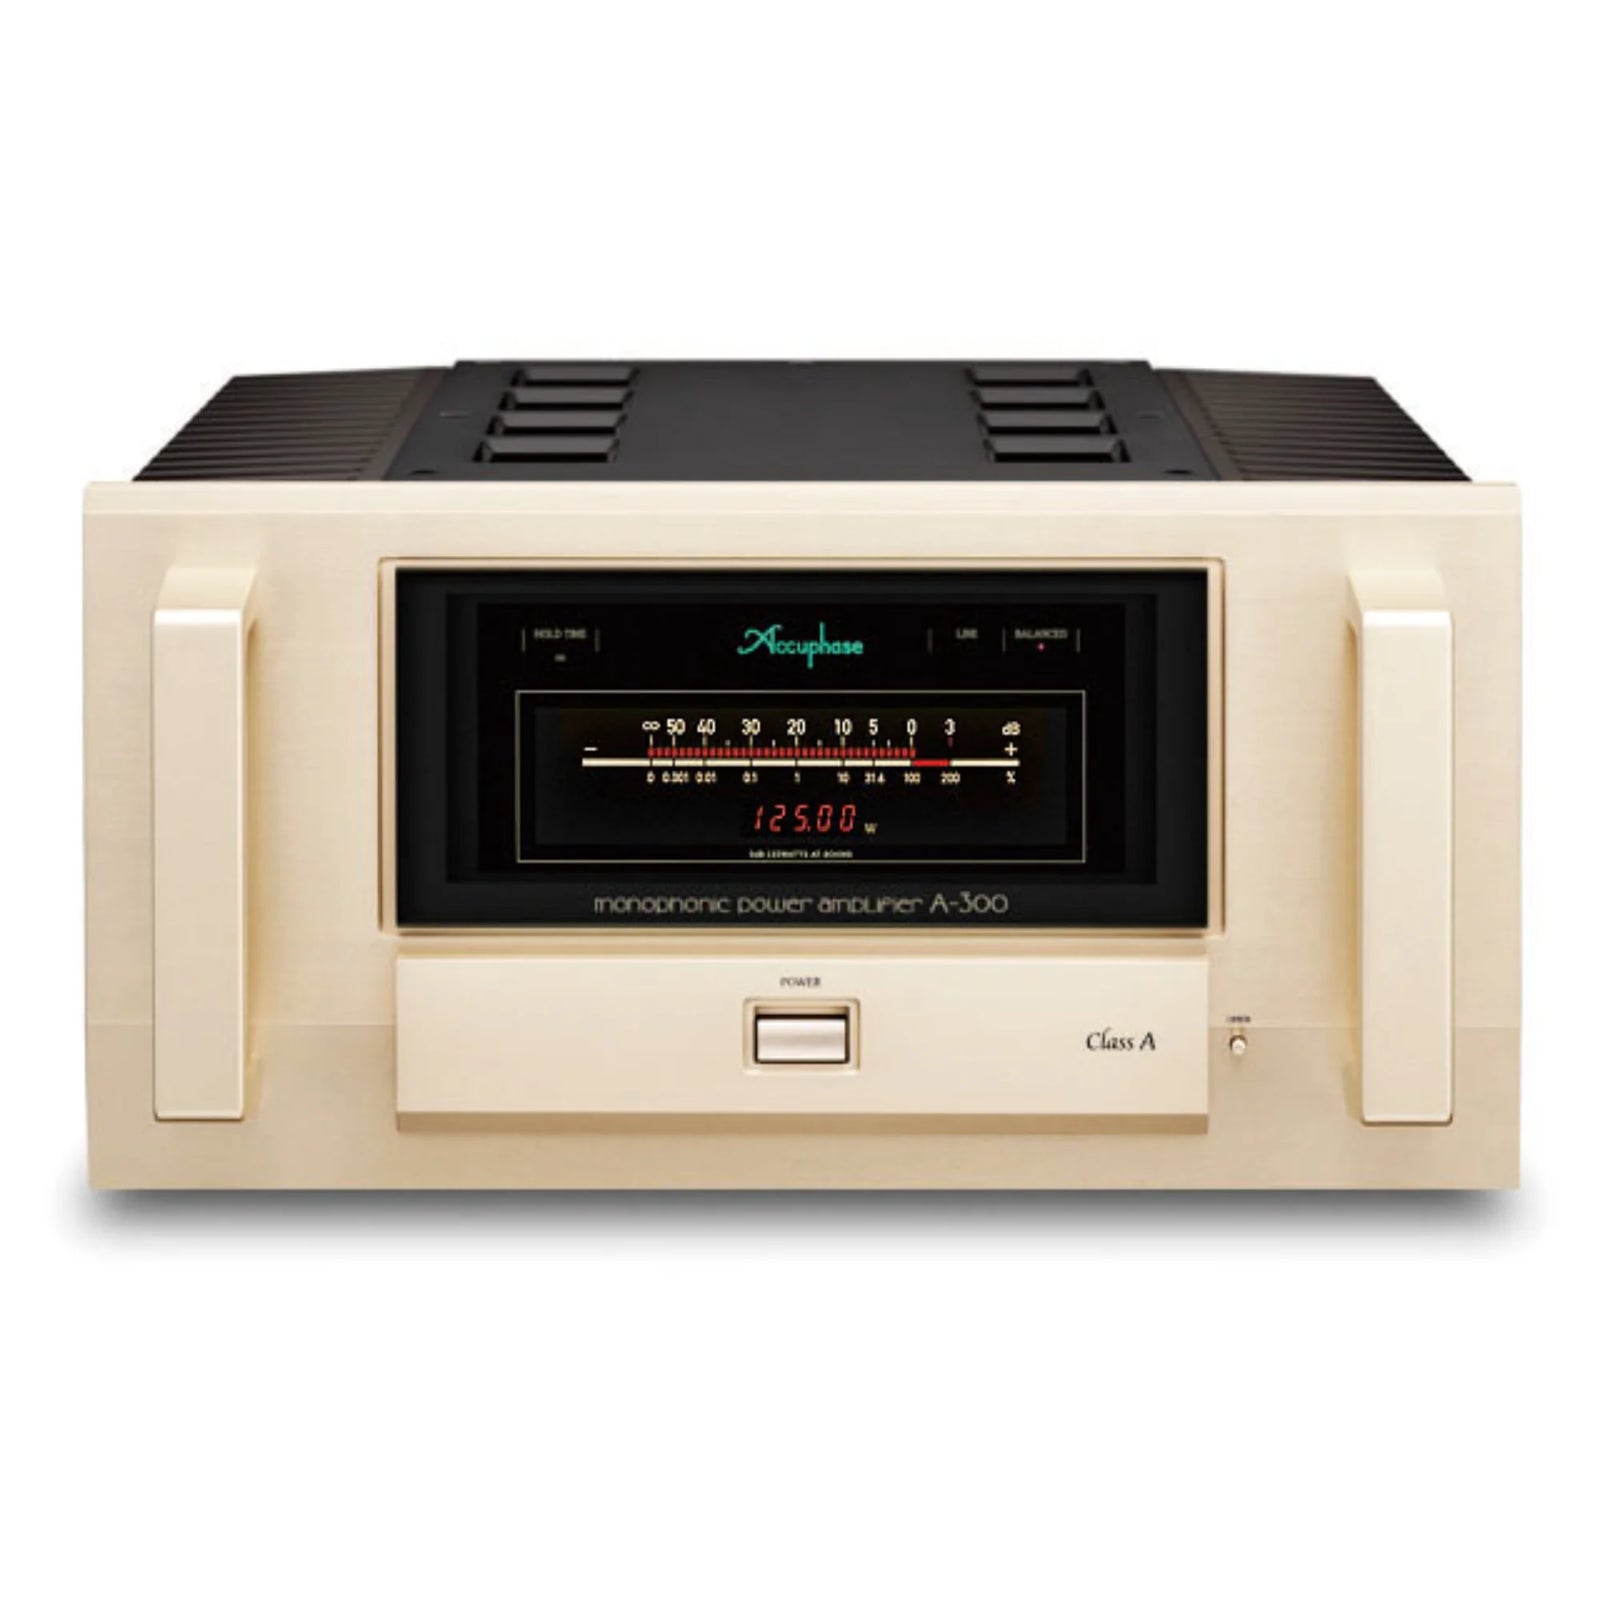 Accuphase A-300 Mono Power Amplifier Product Details & Specifications: Created to mark our 50th anniversary, the A-300 redefines the ideal for Class A power amplifiers. 20-parallel push-pull power MOS-FETs in the output stage improves performance by 25% over conventional models with outputs of 125 W into 8 ohms, 250 W into 4 ohms, 500 W into 2 ohms, and 1,000 W into 1 ohm that set the stage for enviable constant-voltage drive.